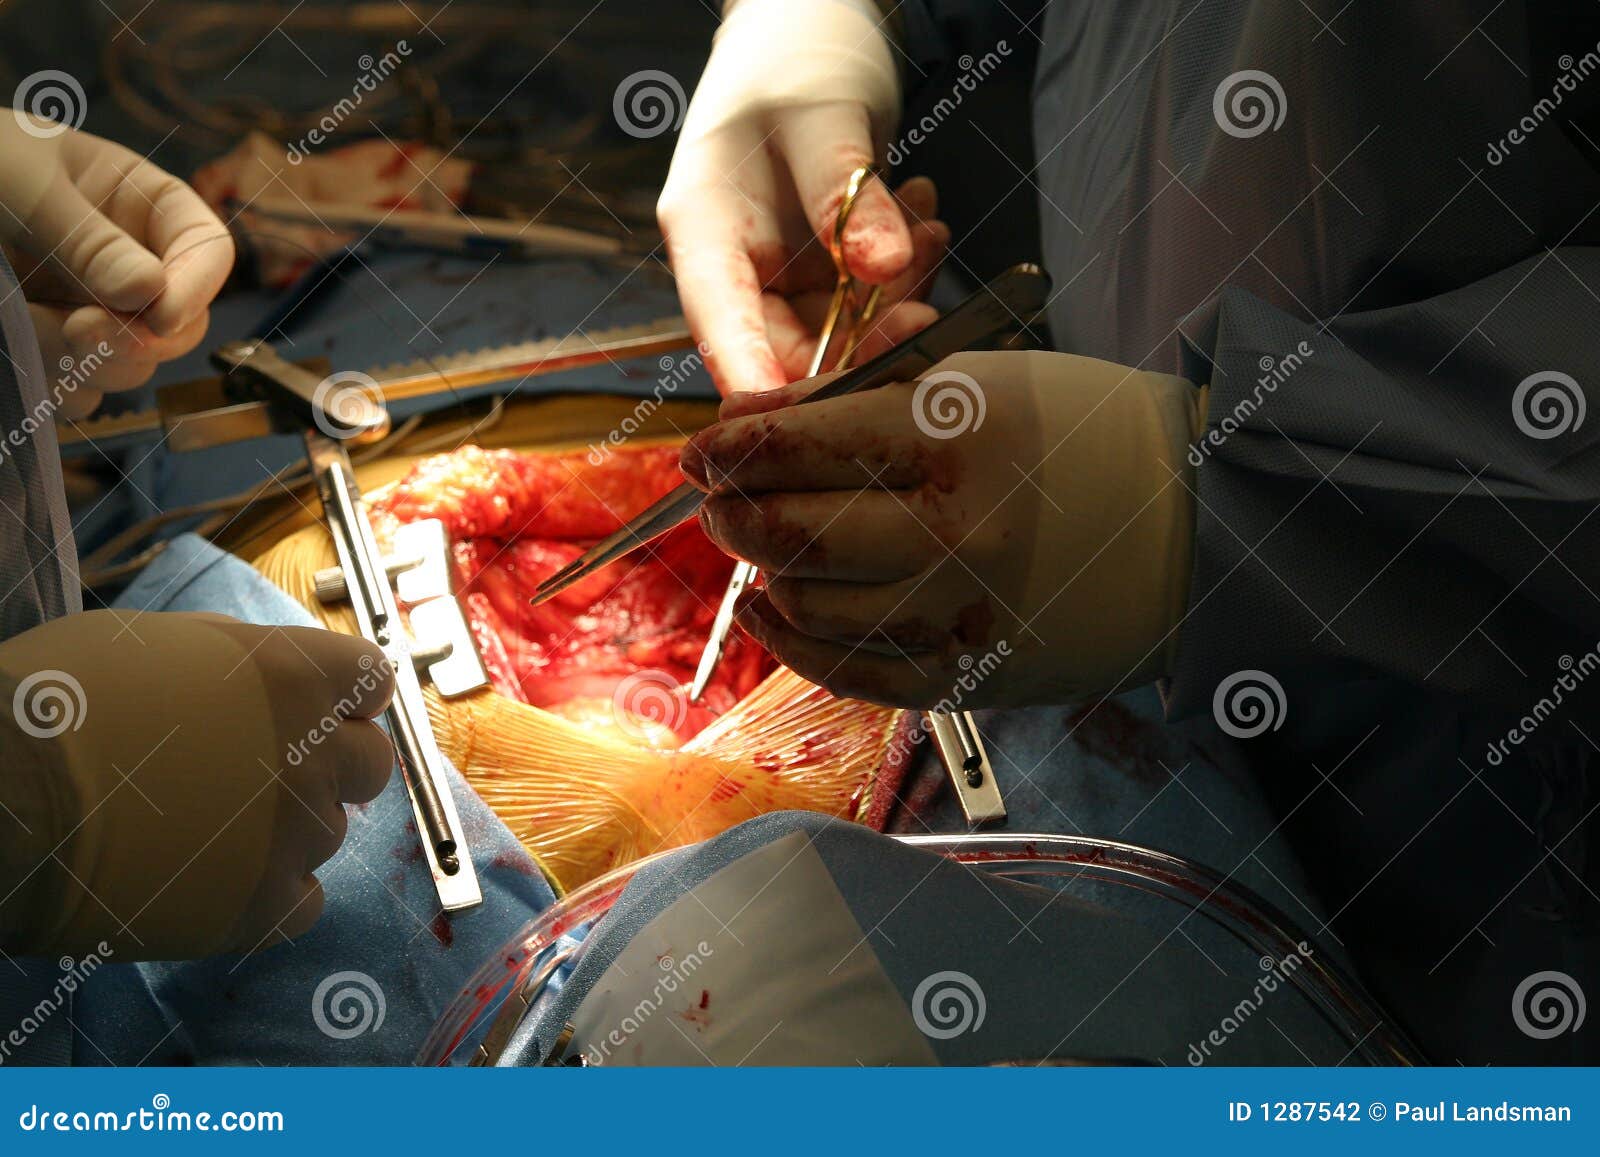 Open heart surgery stock photo. Image of cabg, healthcare - 1287542